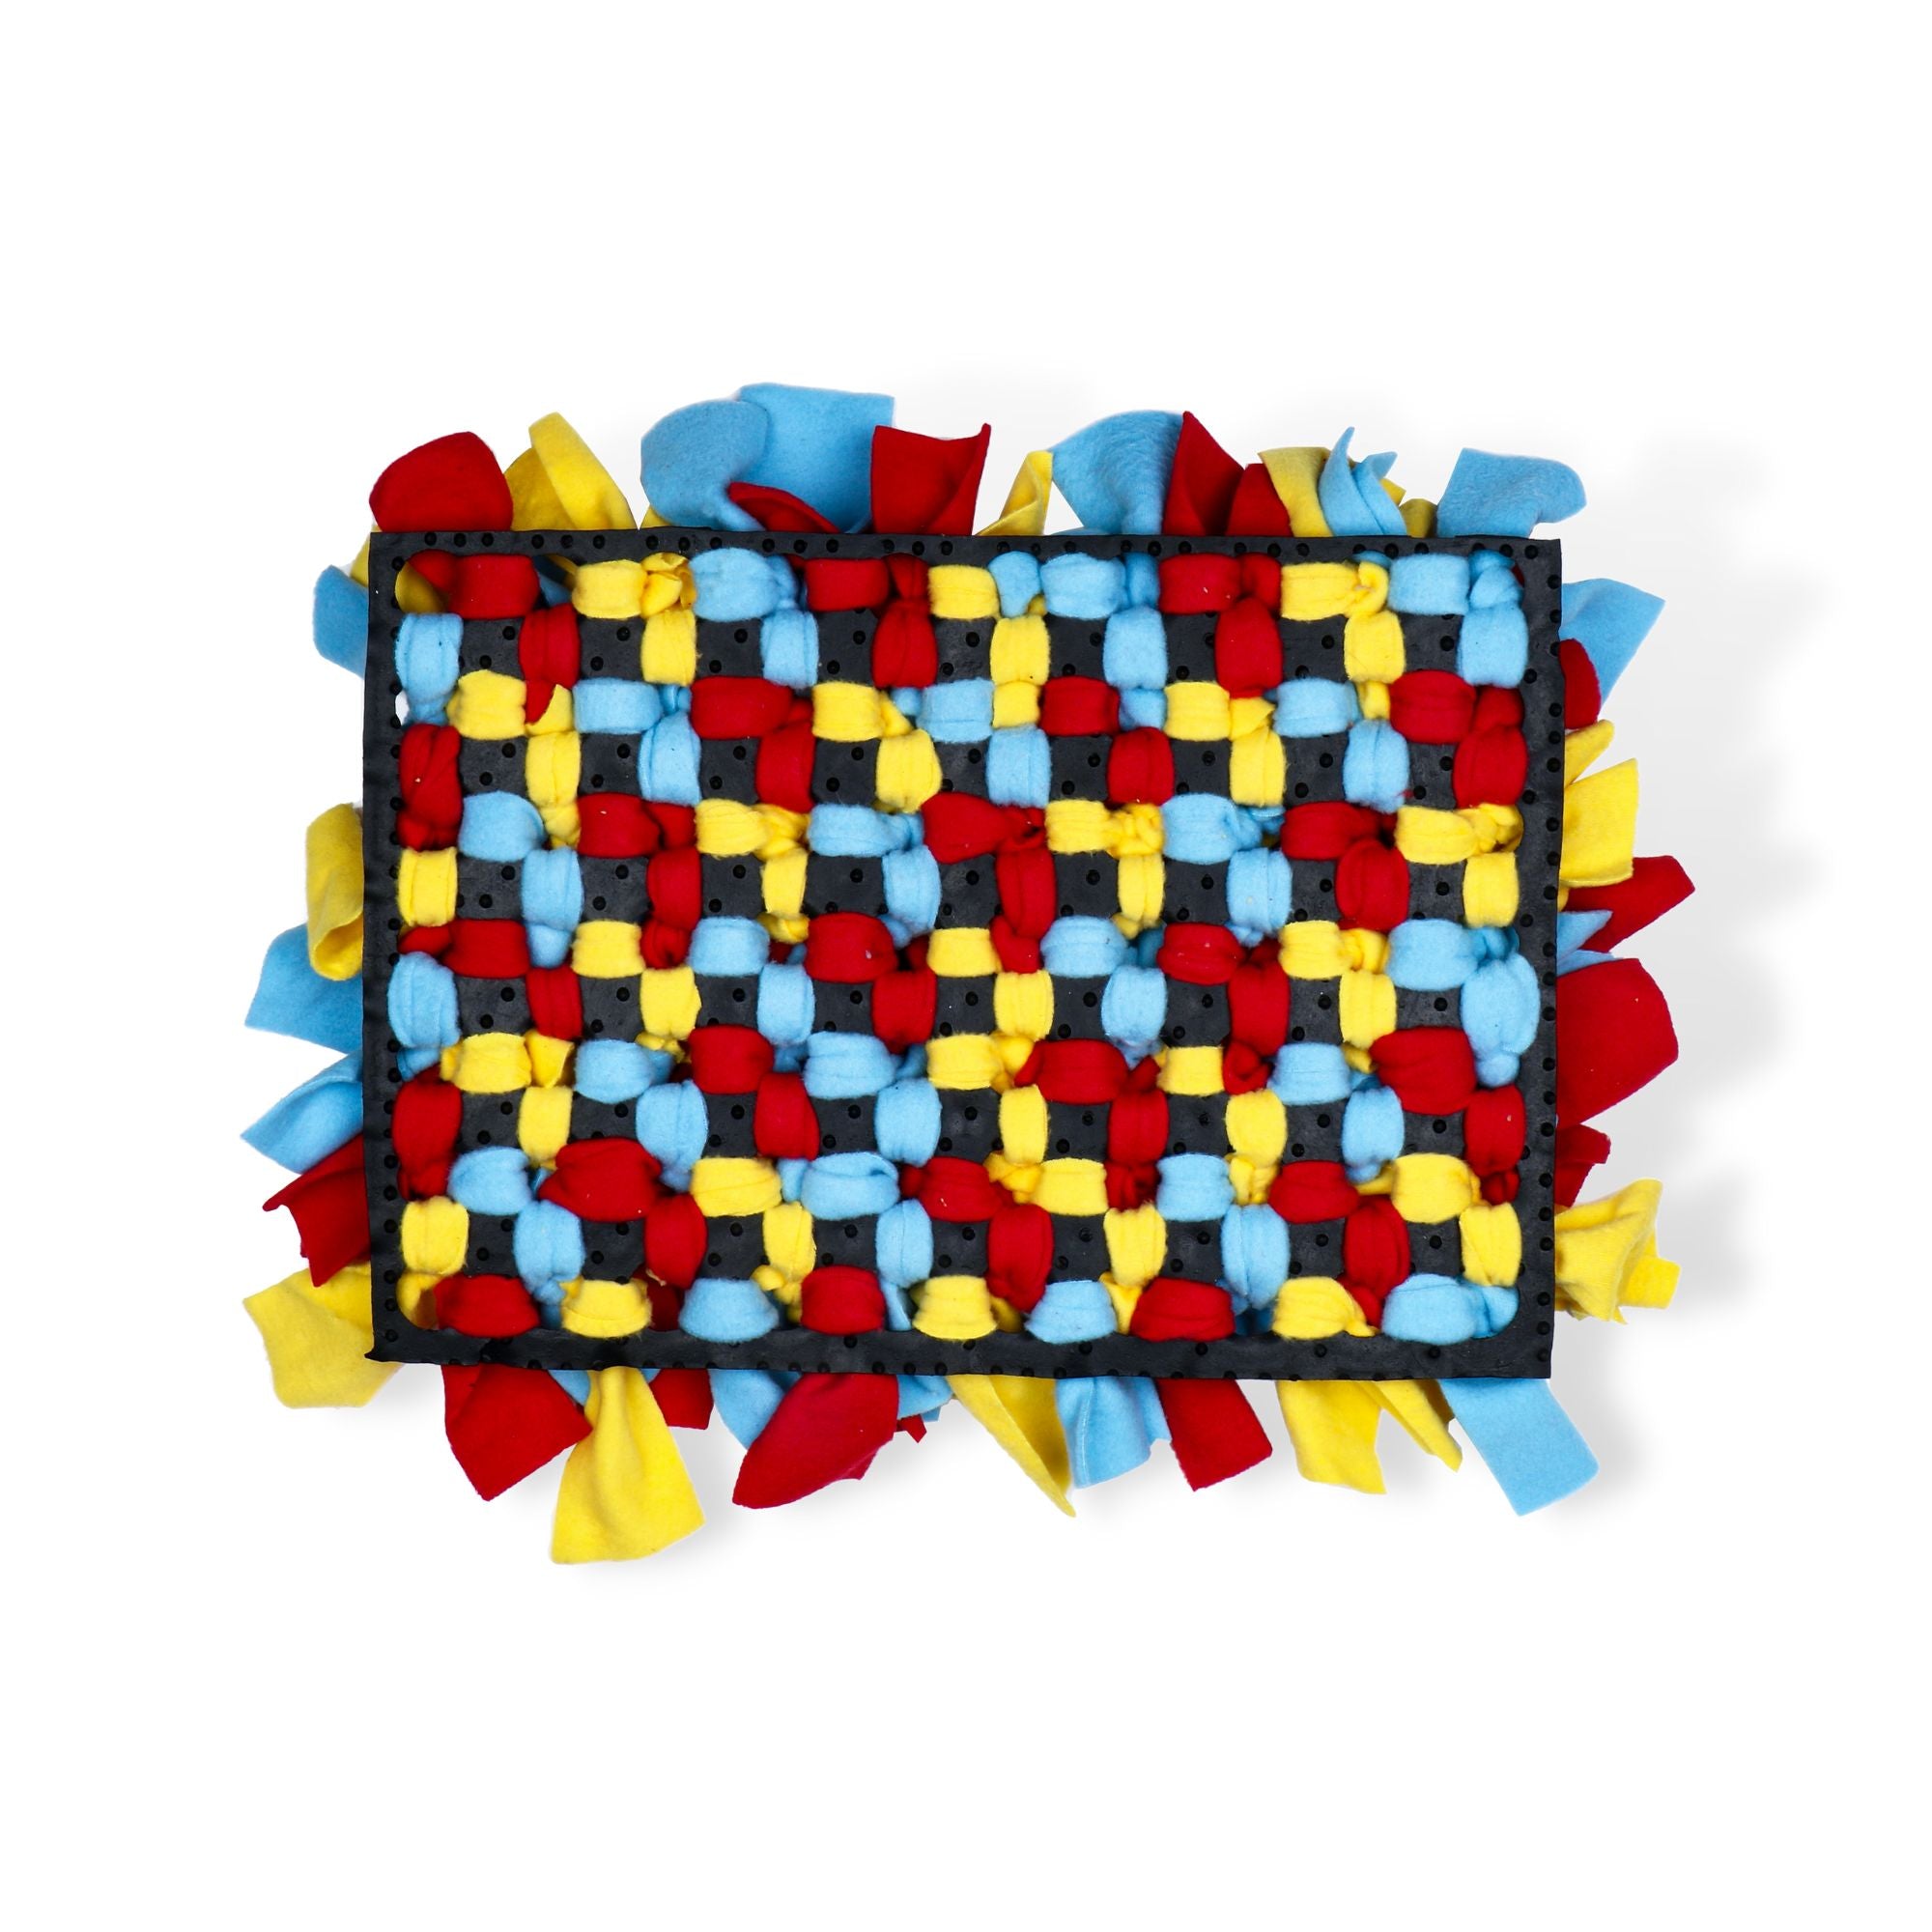 Dog Snuffle Puzzle Mat Toy + Feeding Mat 2in1 - Lego